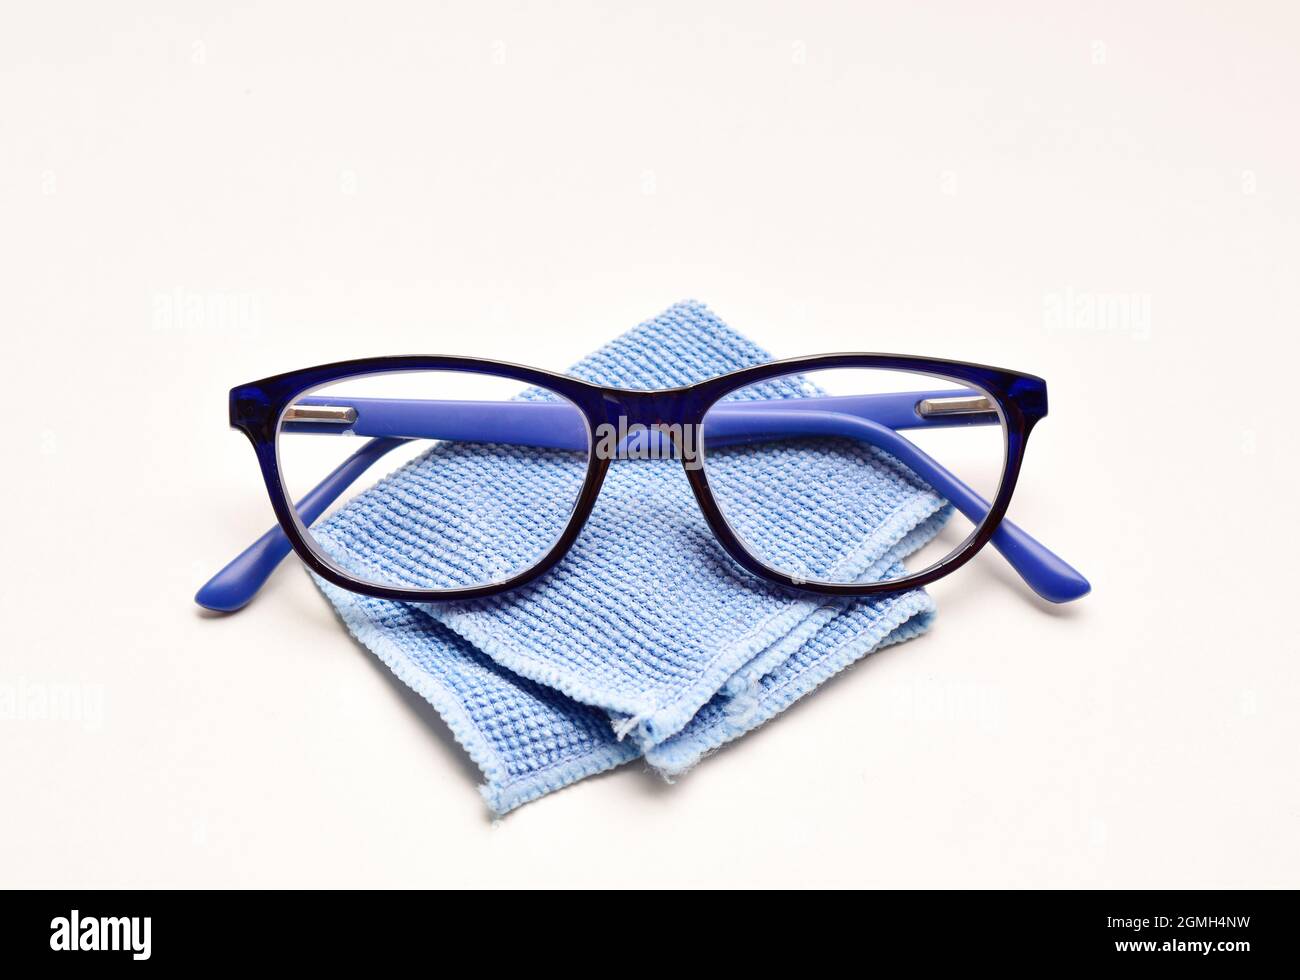 Eyewear with soft microfiber cloth over white background, spectacle and cloth Stock Photo